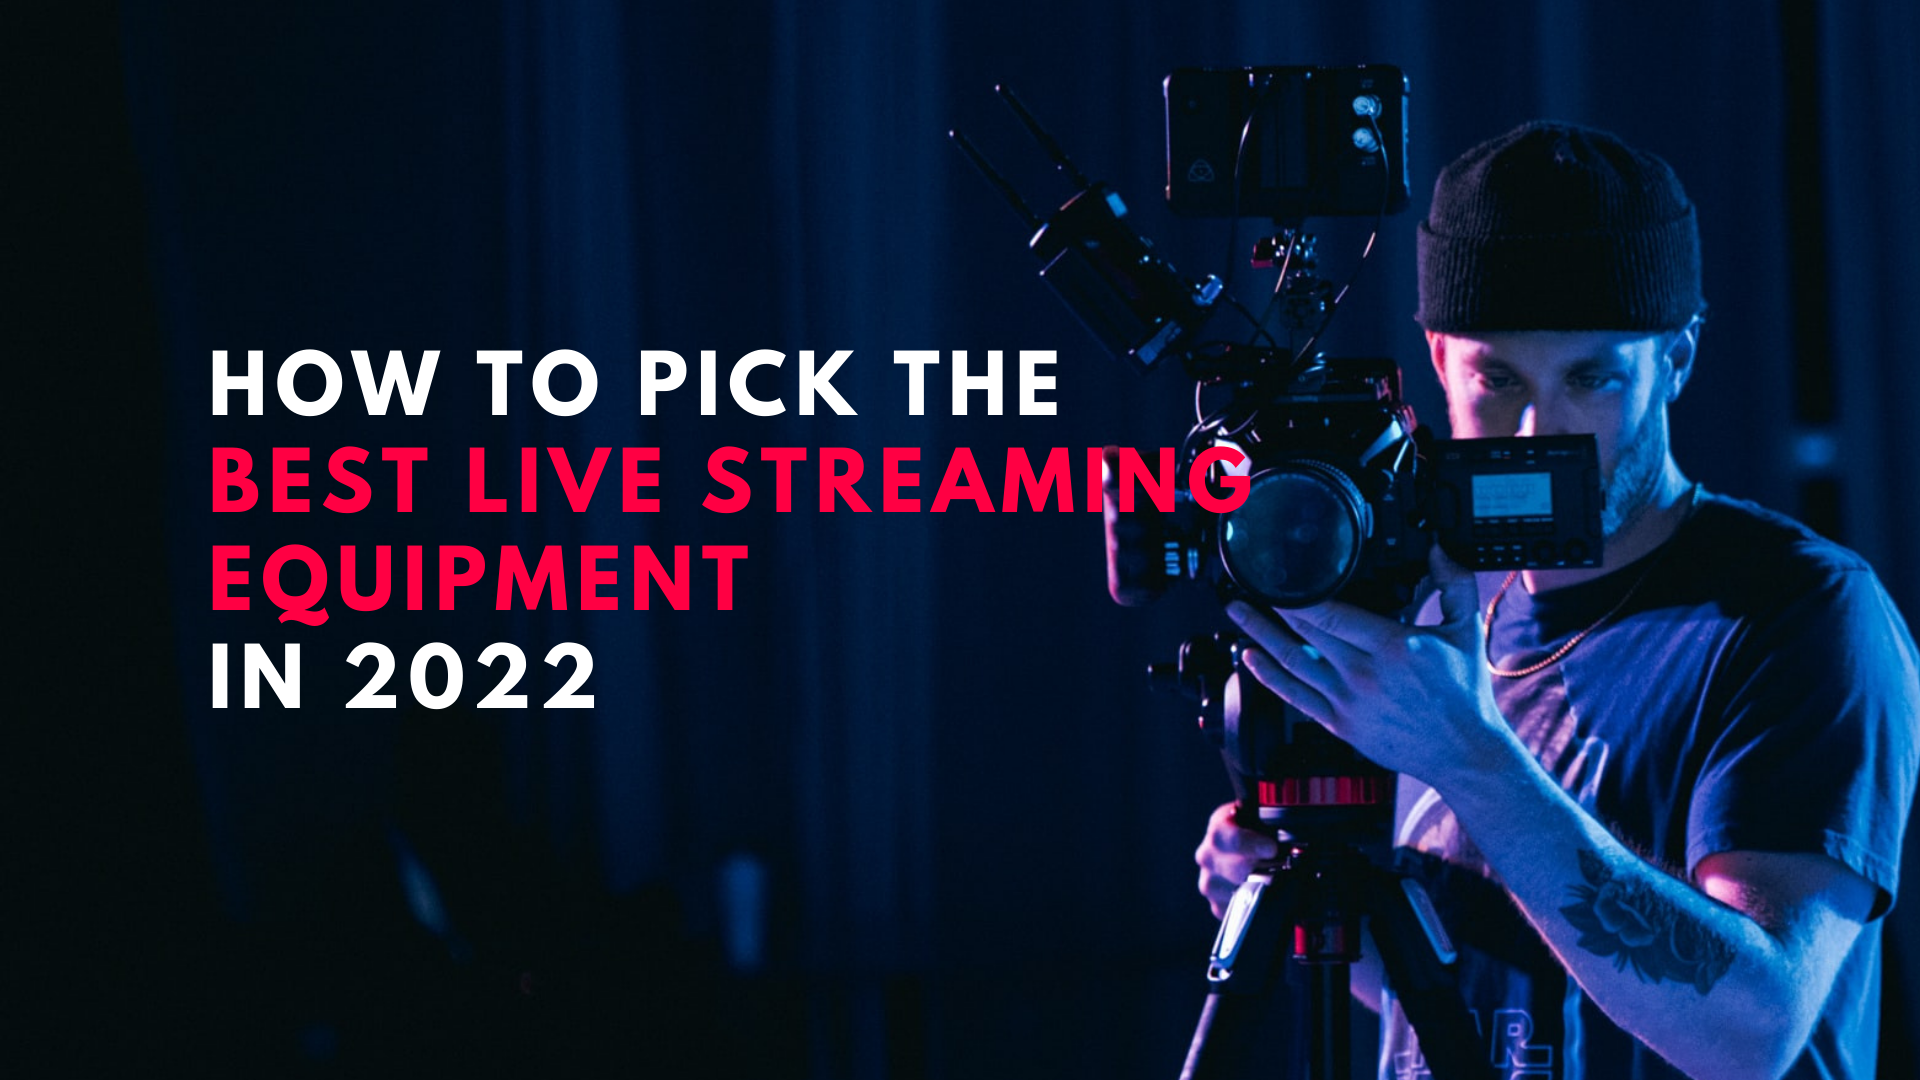 How to Pick the Best Live Streaming Equipment in 2022 